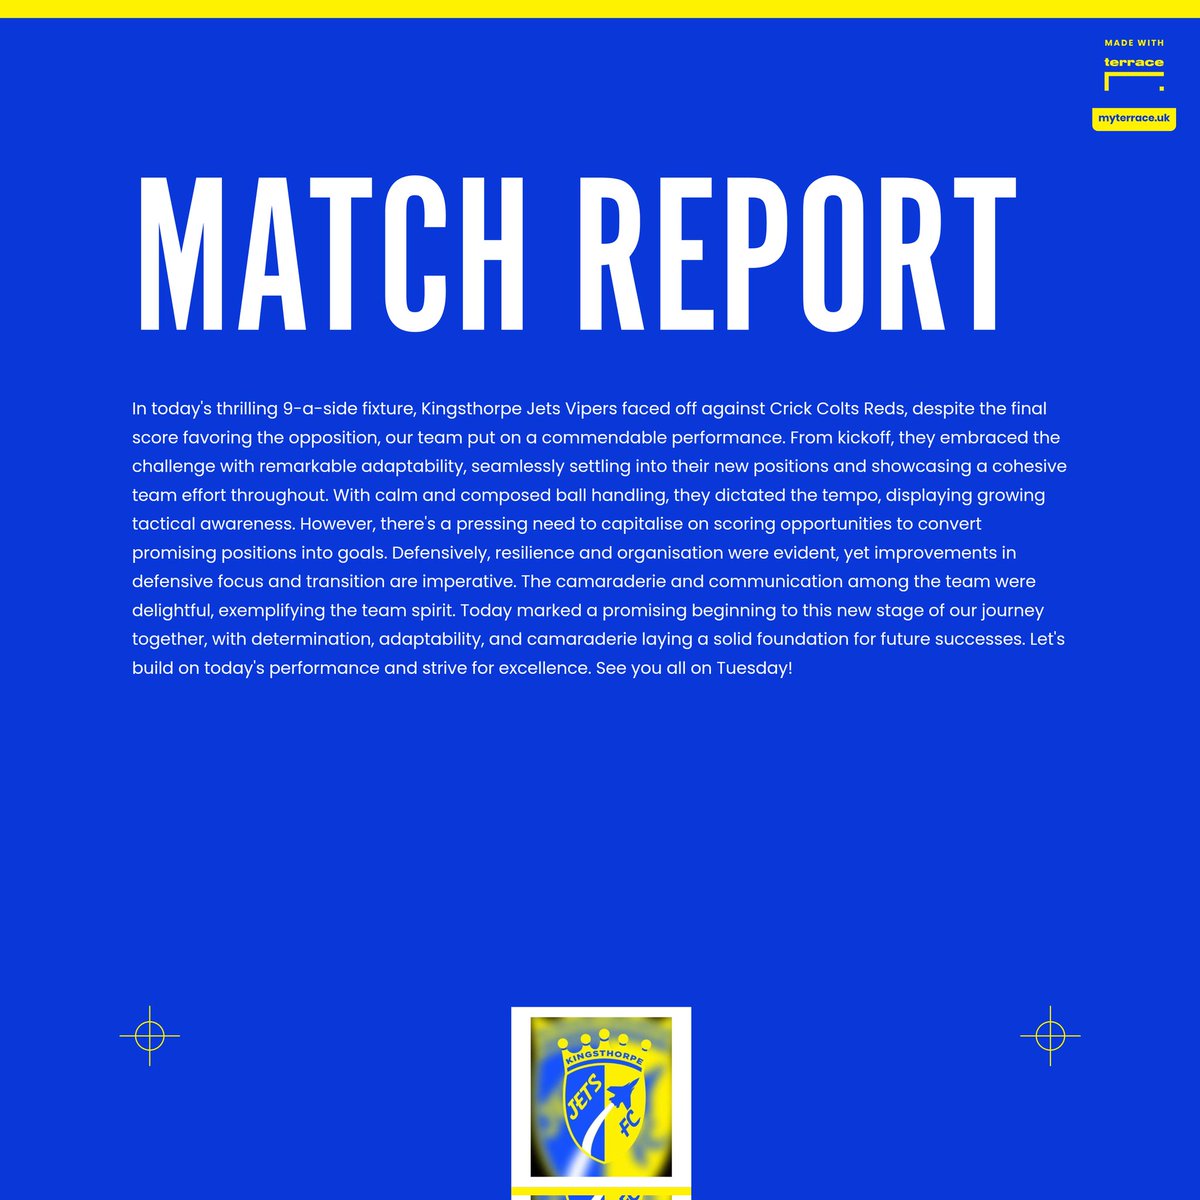 Today's #MatchReport explains a fantastic start to our 9 a side journey. With increased desire to retrieve the ball, as well as more accurate finishing, there's lots to come! #ComeOnVipers!